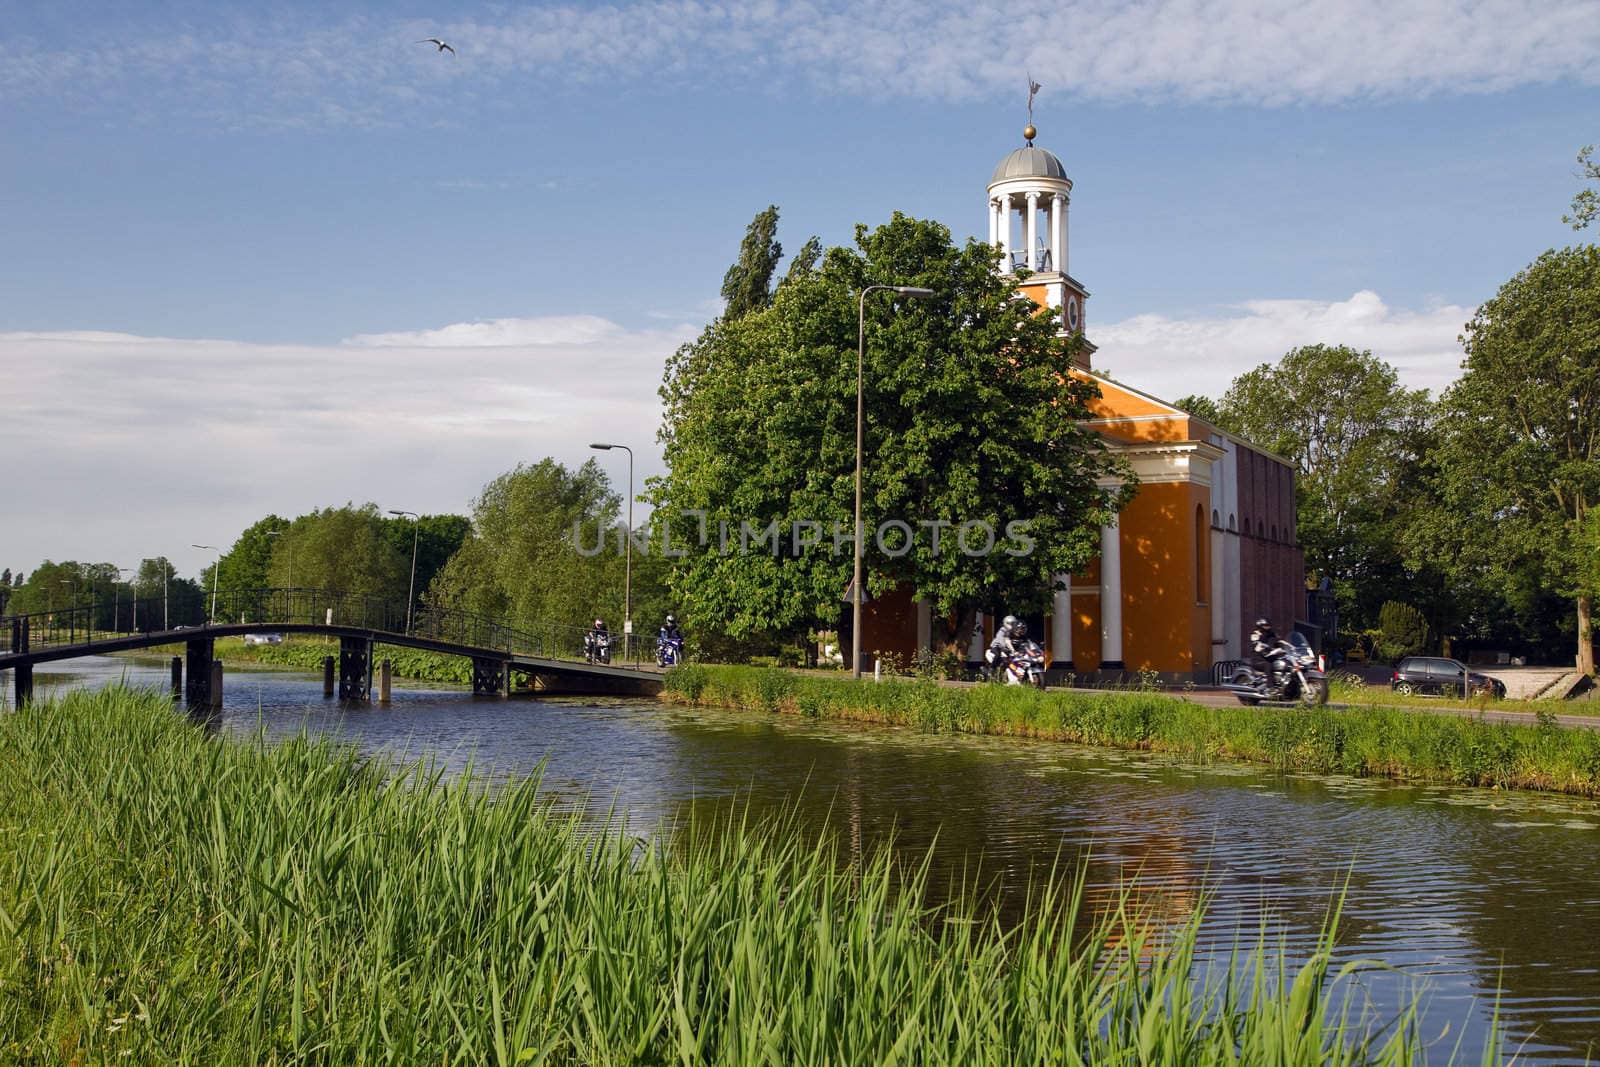 Church, bridge and country road by Colette